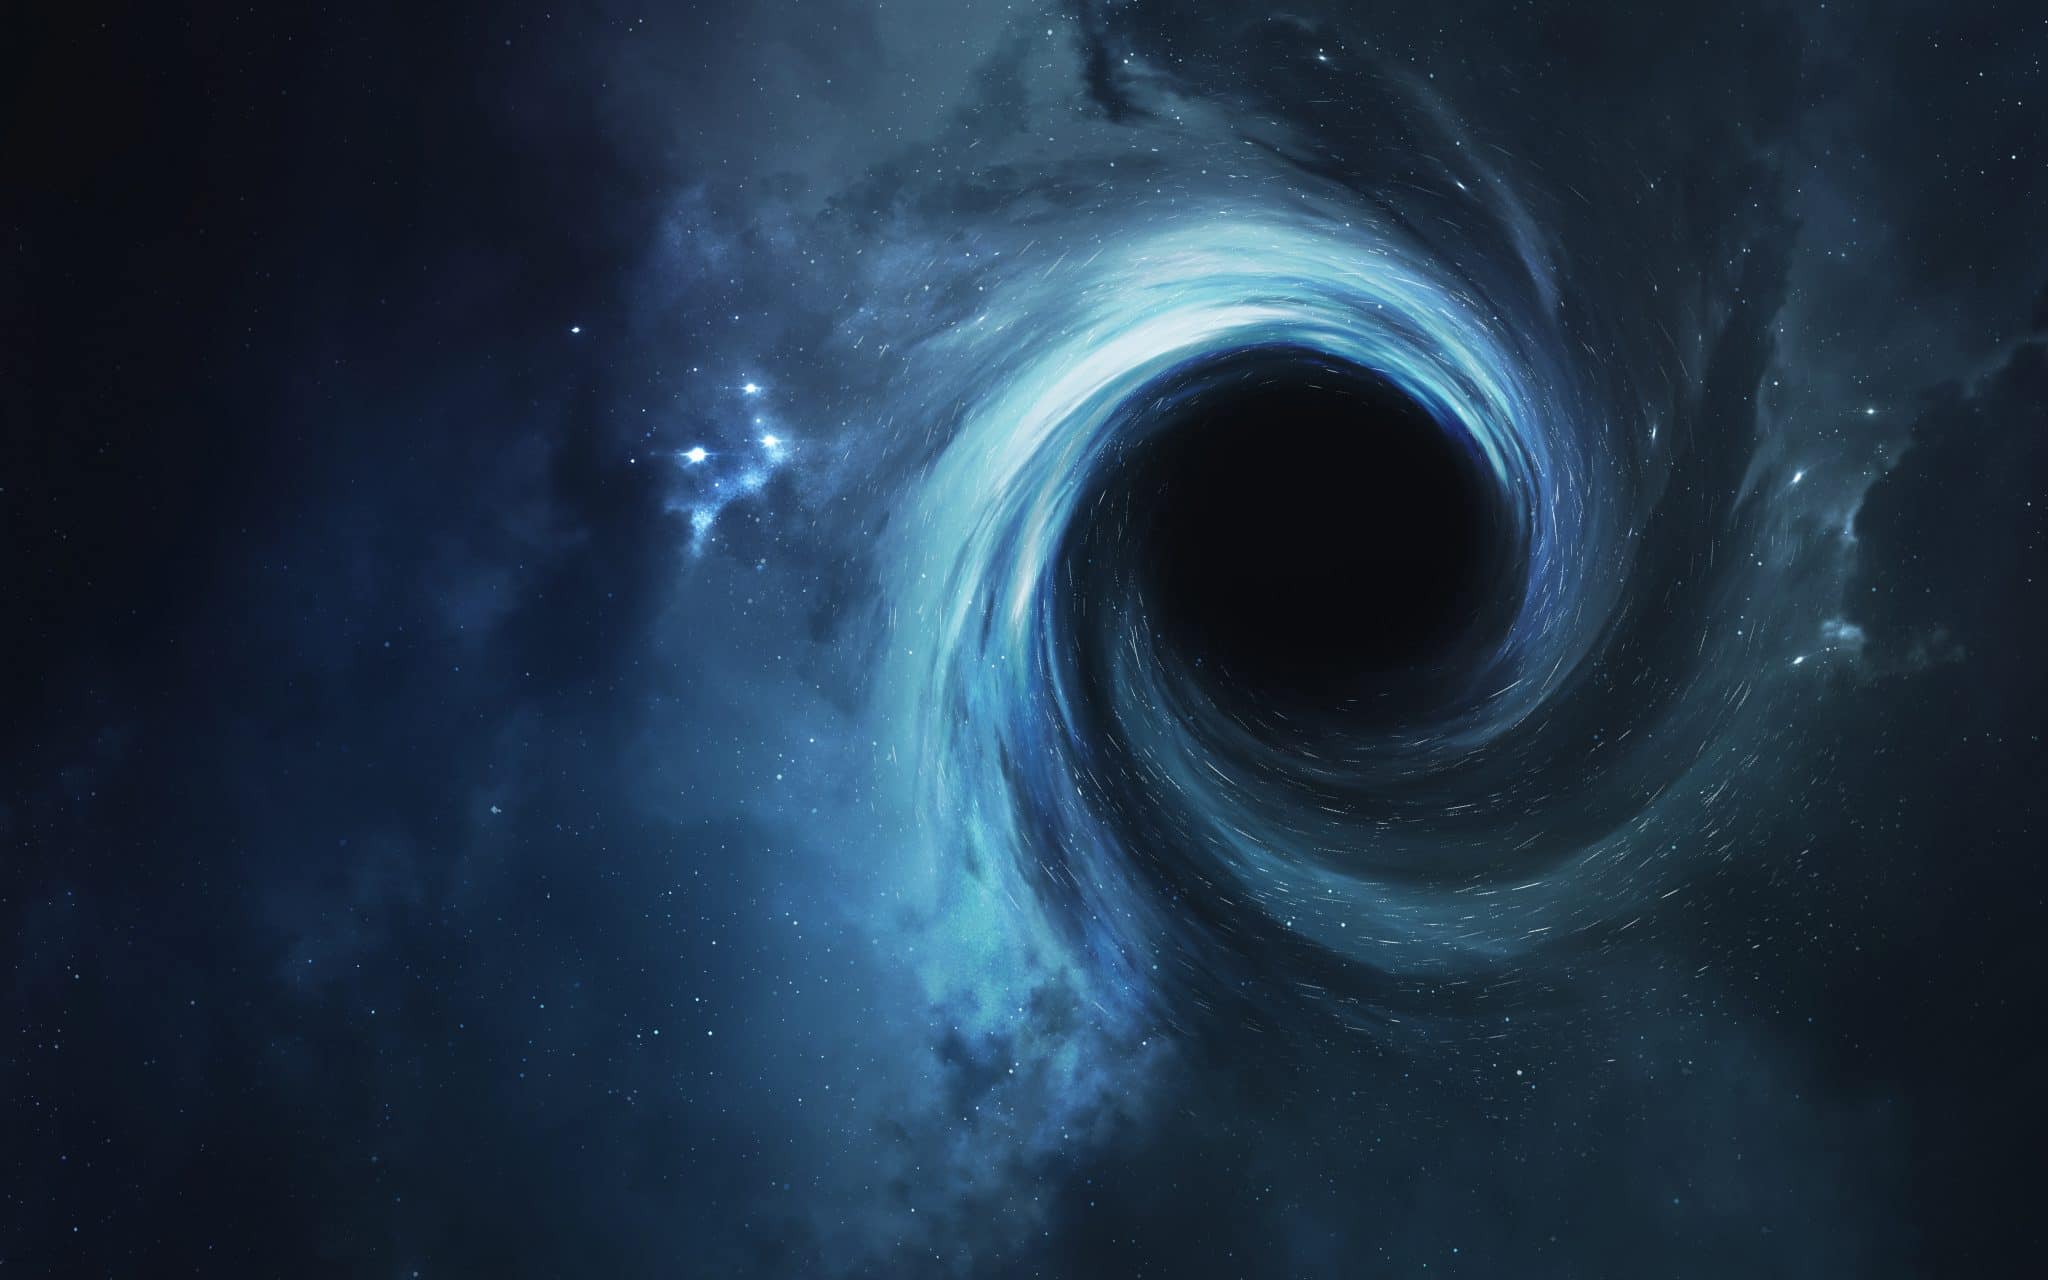 A supermassive black hole is wandering through space